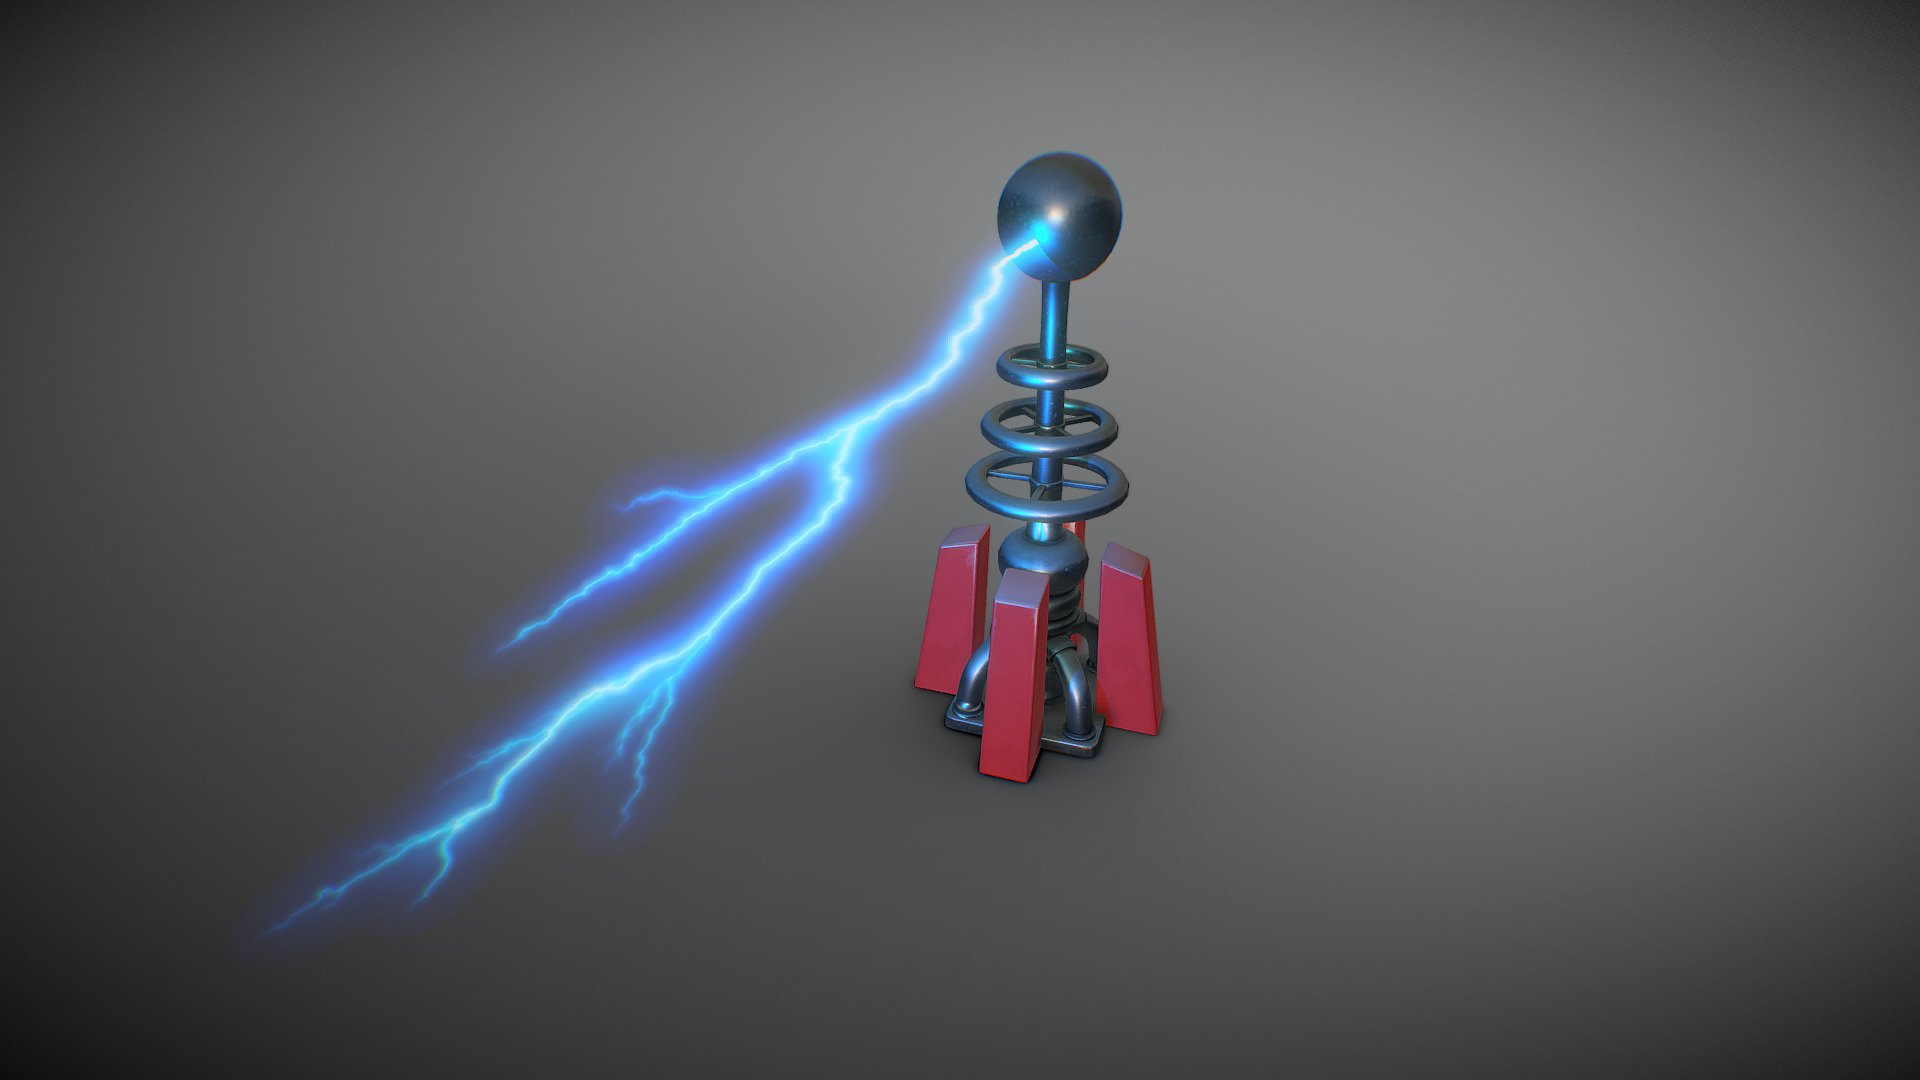 Fan art of the Soviet Tesla Coil from Command &amp; Conquer: Red Alert 2.

Tools used, 3DS Max, Photoshop, Substance Painter - Red Alert Tesla Coil - 3D model by Ashley Aslett (@AshleyAslett) 3d model